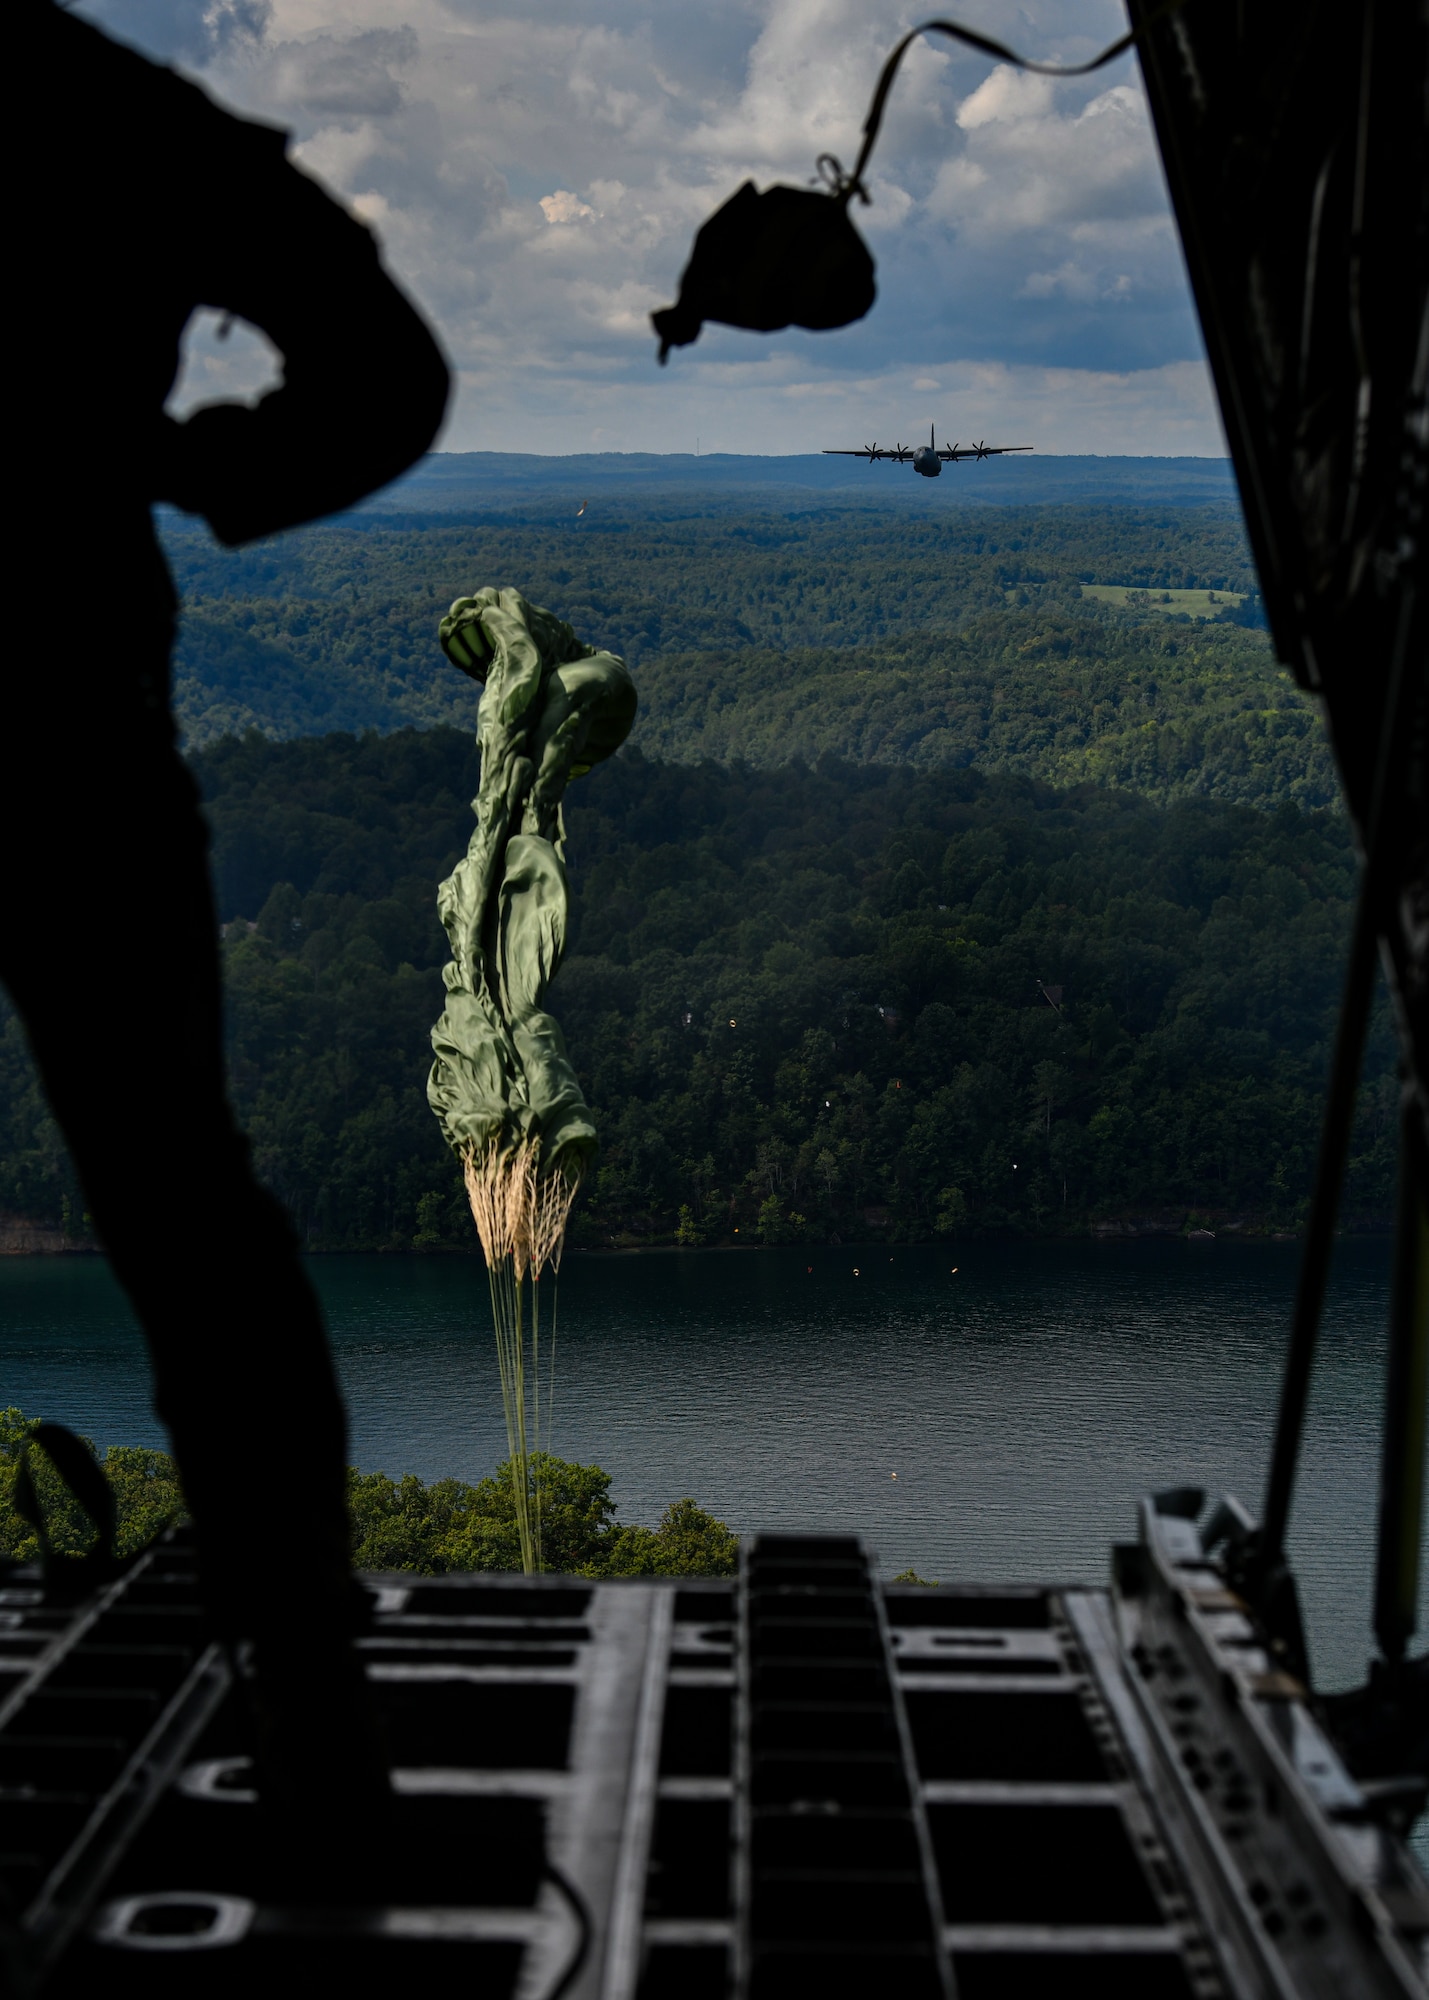 A parachute attached to cargo opens after being pushed out the back of a C-130H Hercules aircraft by a loadmaster on Aug. 23, 2020,  over Summerville Lake, West Virginia. Five Air Force Reserve units from the 22nd Air Force and a West Virginia Air National Guard unit participated in Rally in the Valley, a multi-day C-130 training exercise under a distributed operations concept, Aug. 22-25, 2020. The exercise included cargo drops, high-altitude paratrooper drops, task force resupply and personnel extraction.